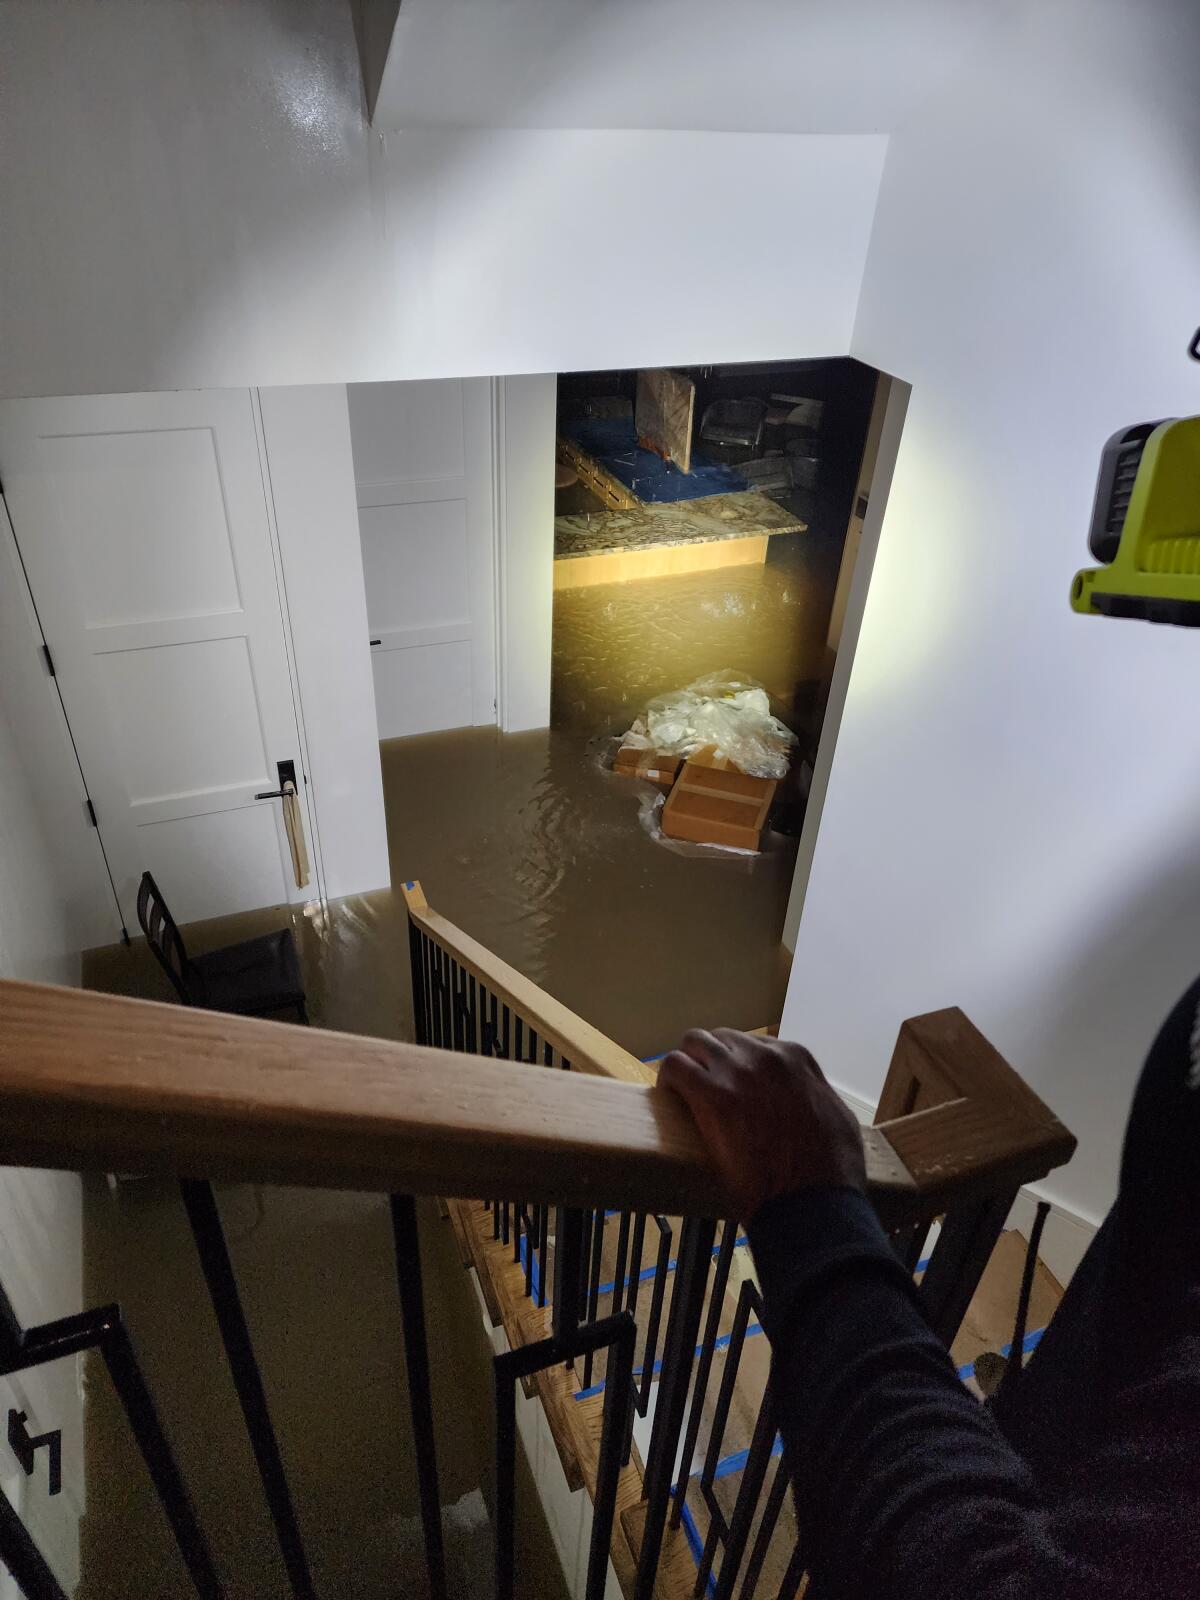 Flooding is pictured from the stairs of the Senks' home.